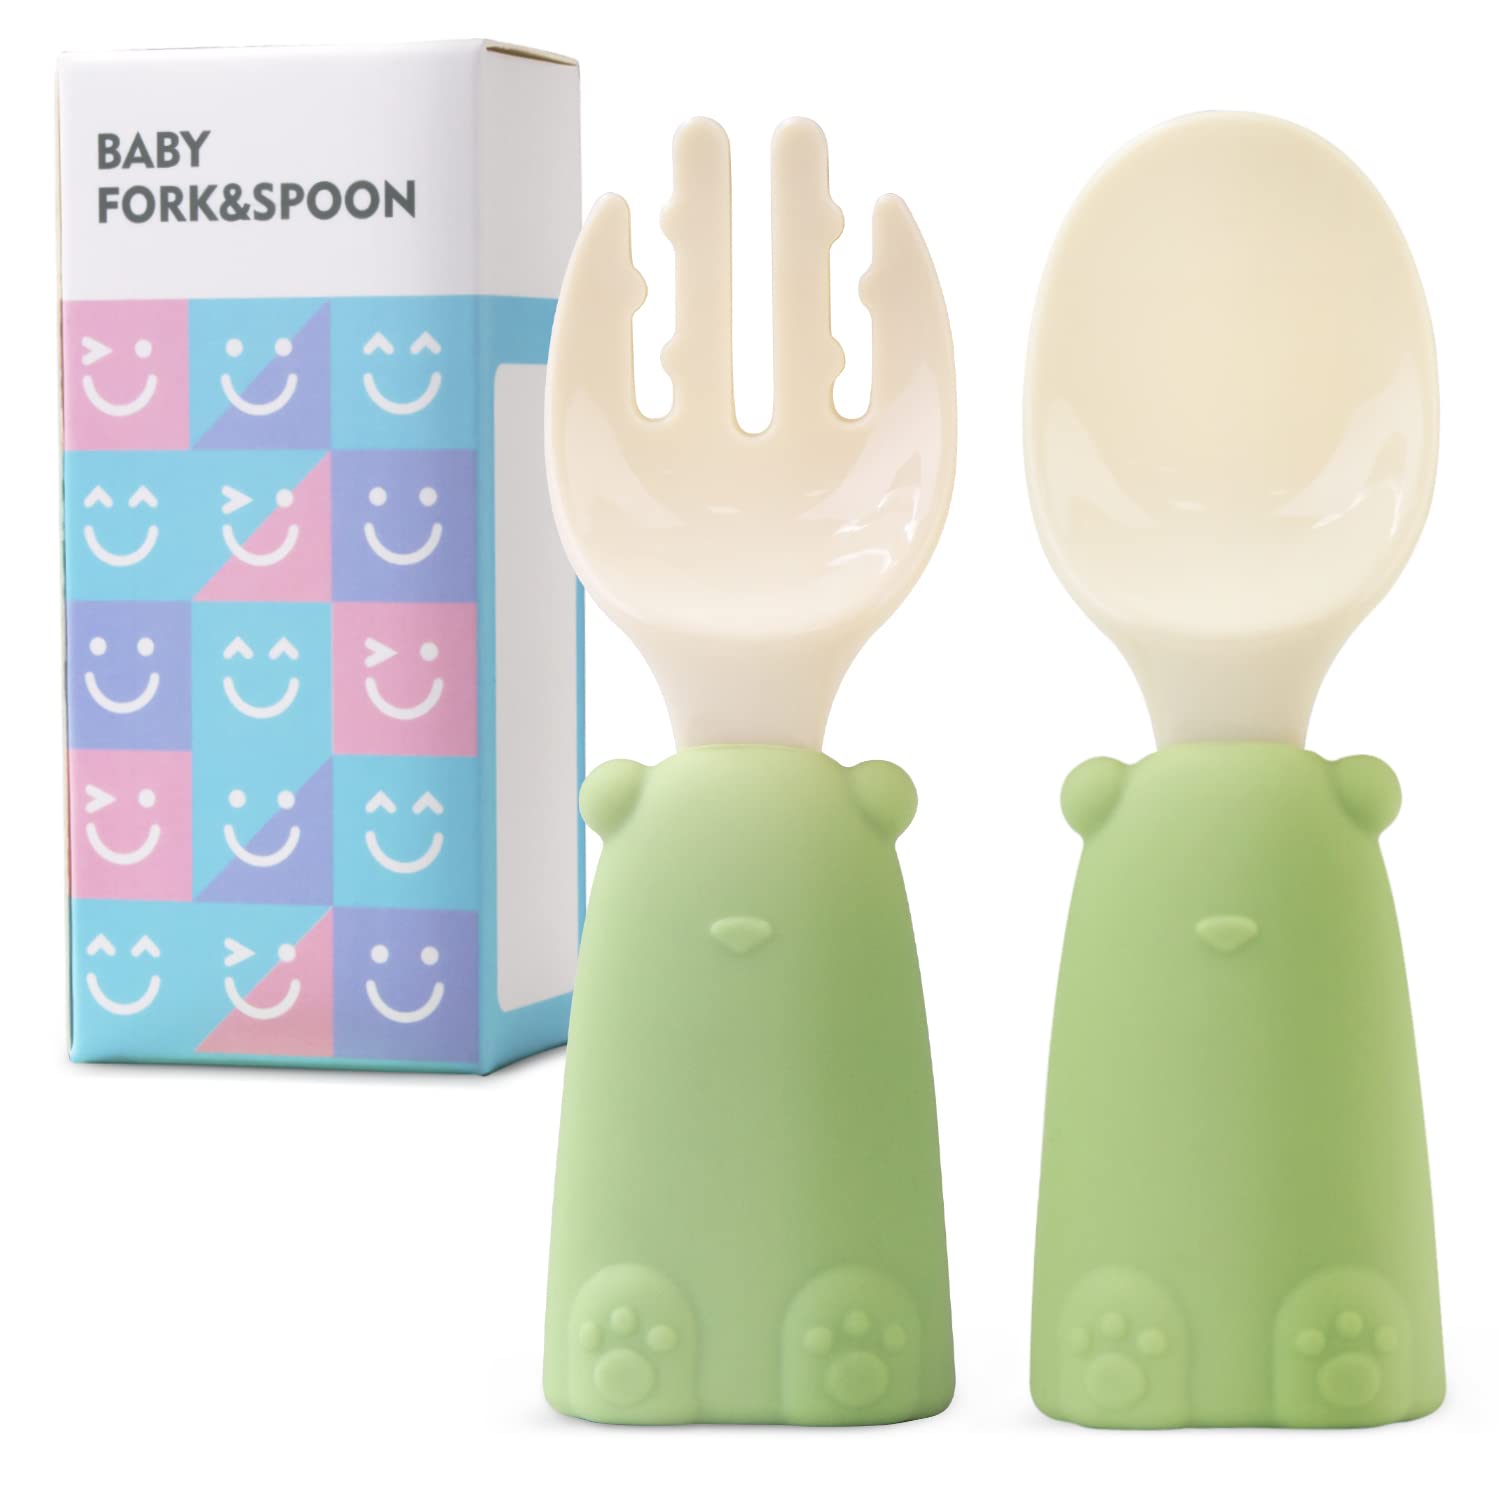 Baby Fork and Spoon Set, Easy Grip Cutlery Set for Children, Toddler, Silicone Baby Short Handle Training Utensils Ergonomically Designed to Promote Self-Feeding, 6-12 Month (Olive)